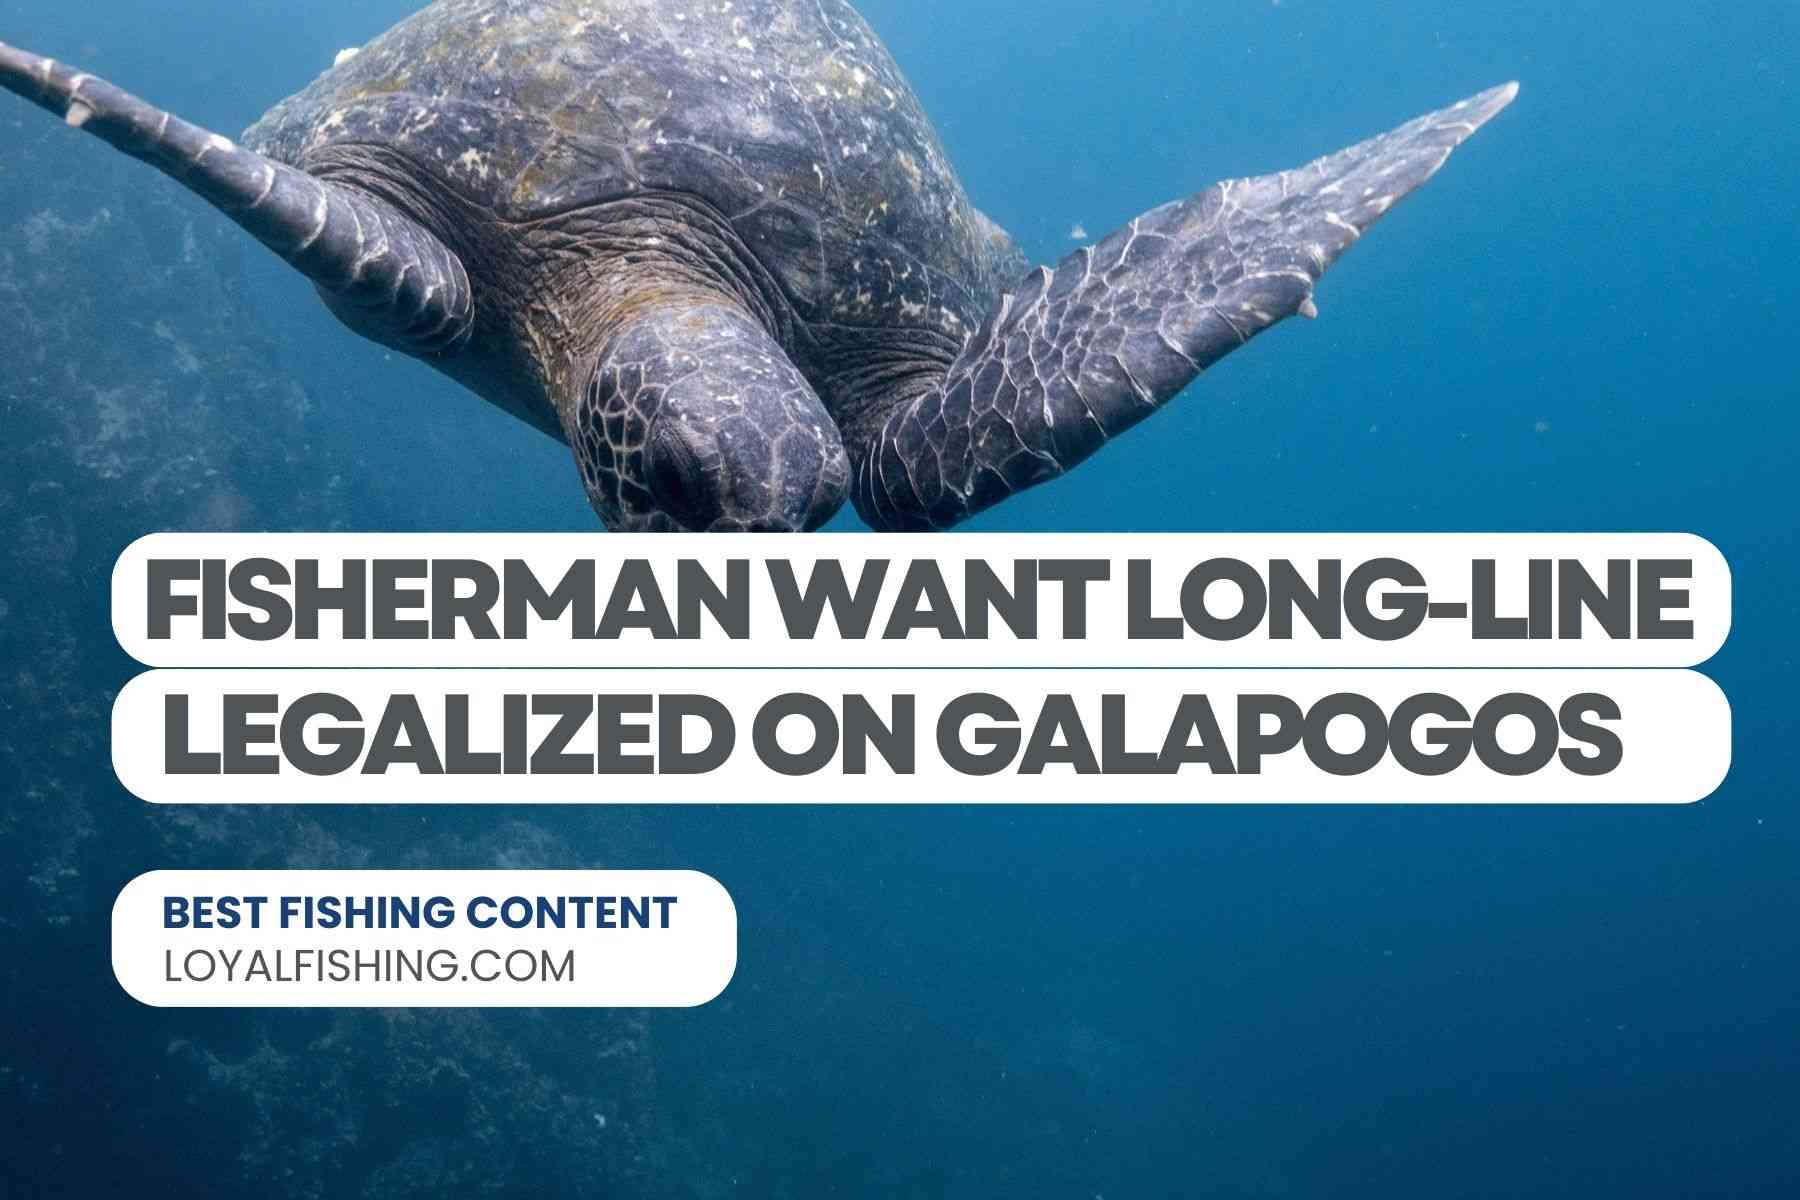 Why Did Fisherman Want Long-Line Fishing Legalized on Galapogos